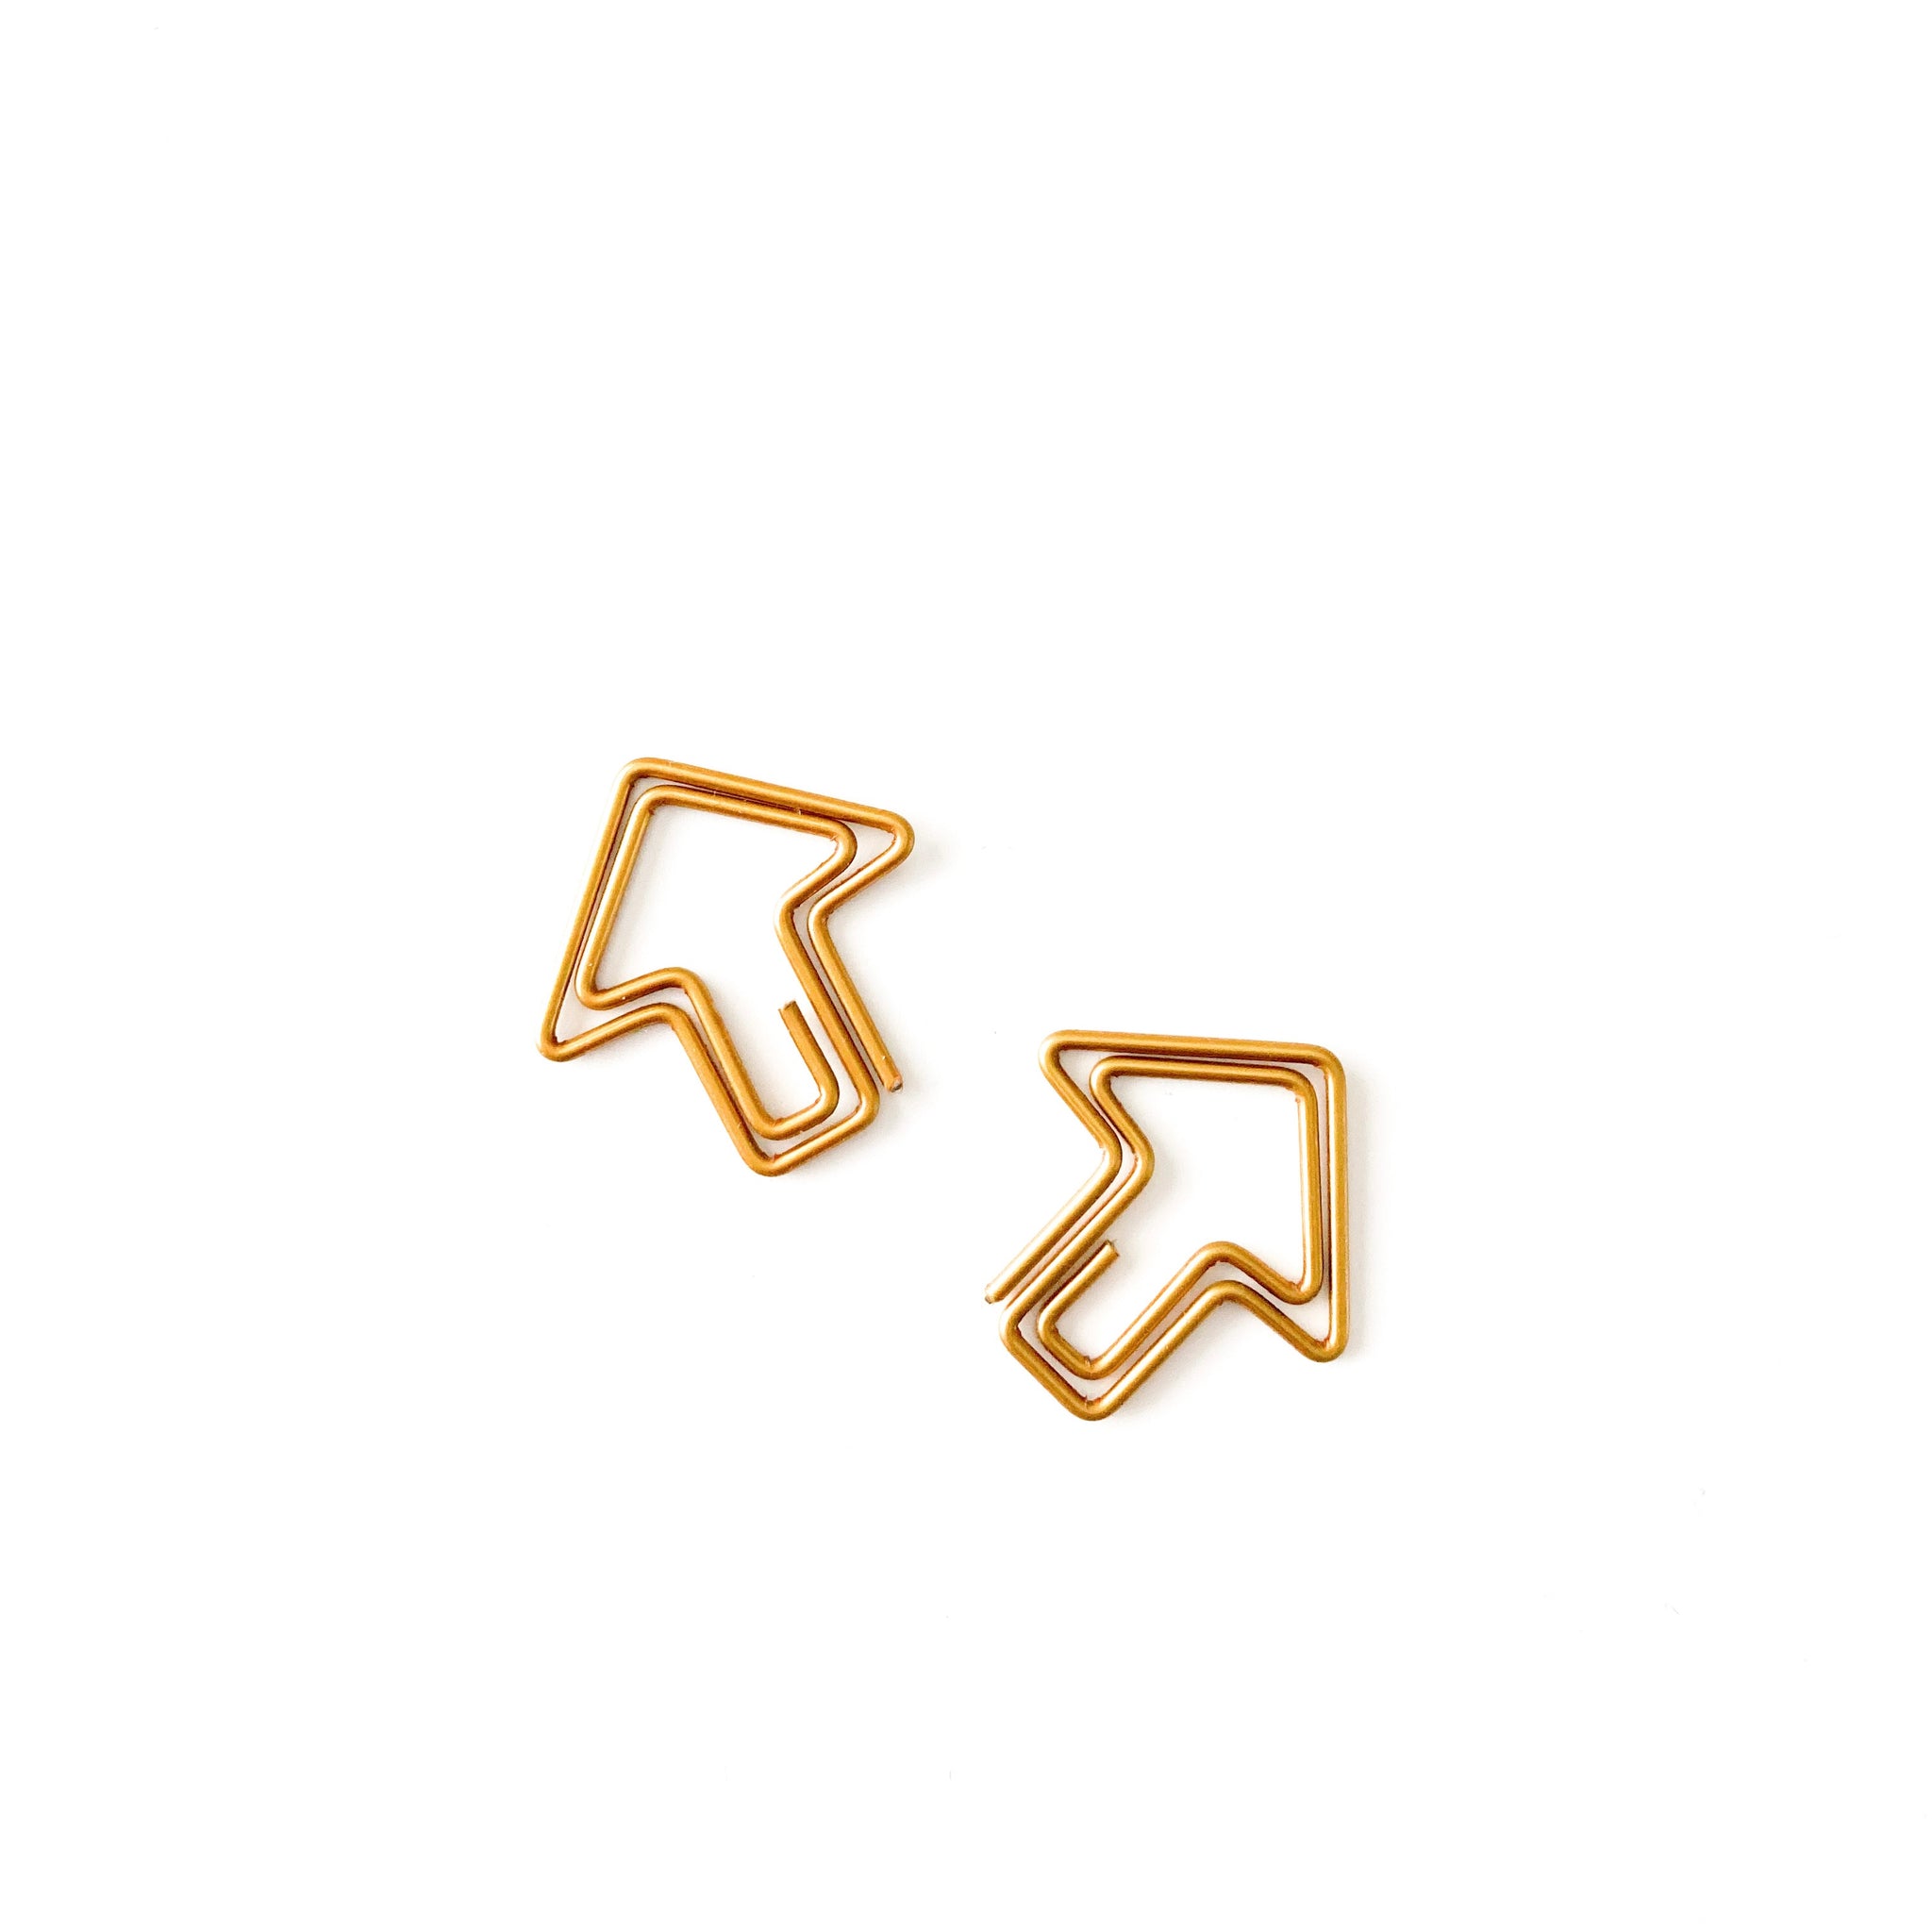 GOLD ARROW SPECIALTY PAPERCLIP - PAGE MARKERS